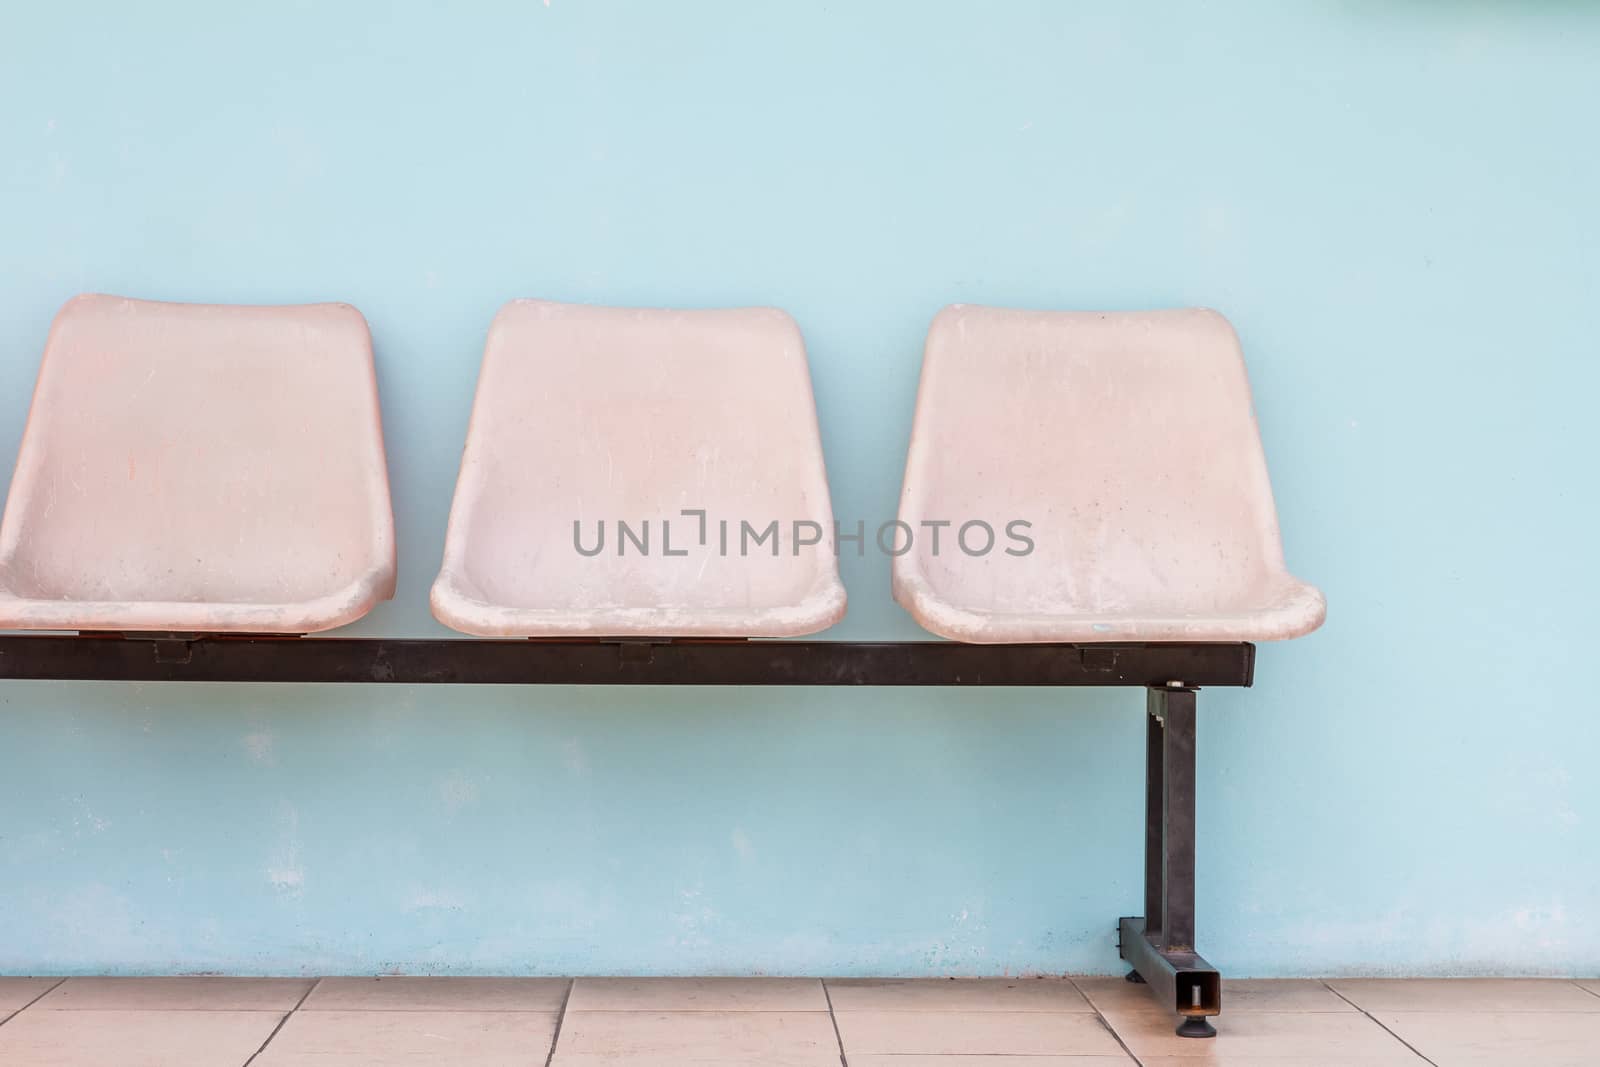 Old row of chairs with plain light blue wall